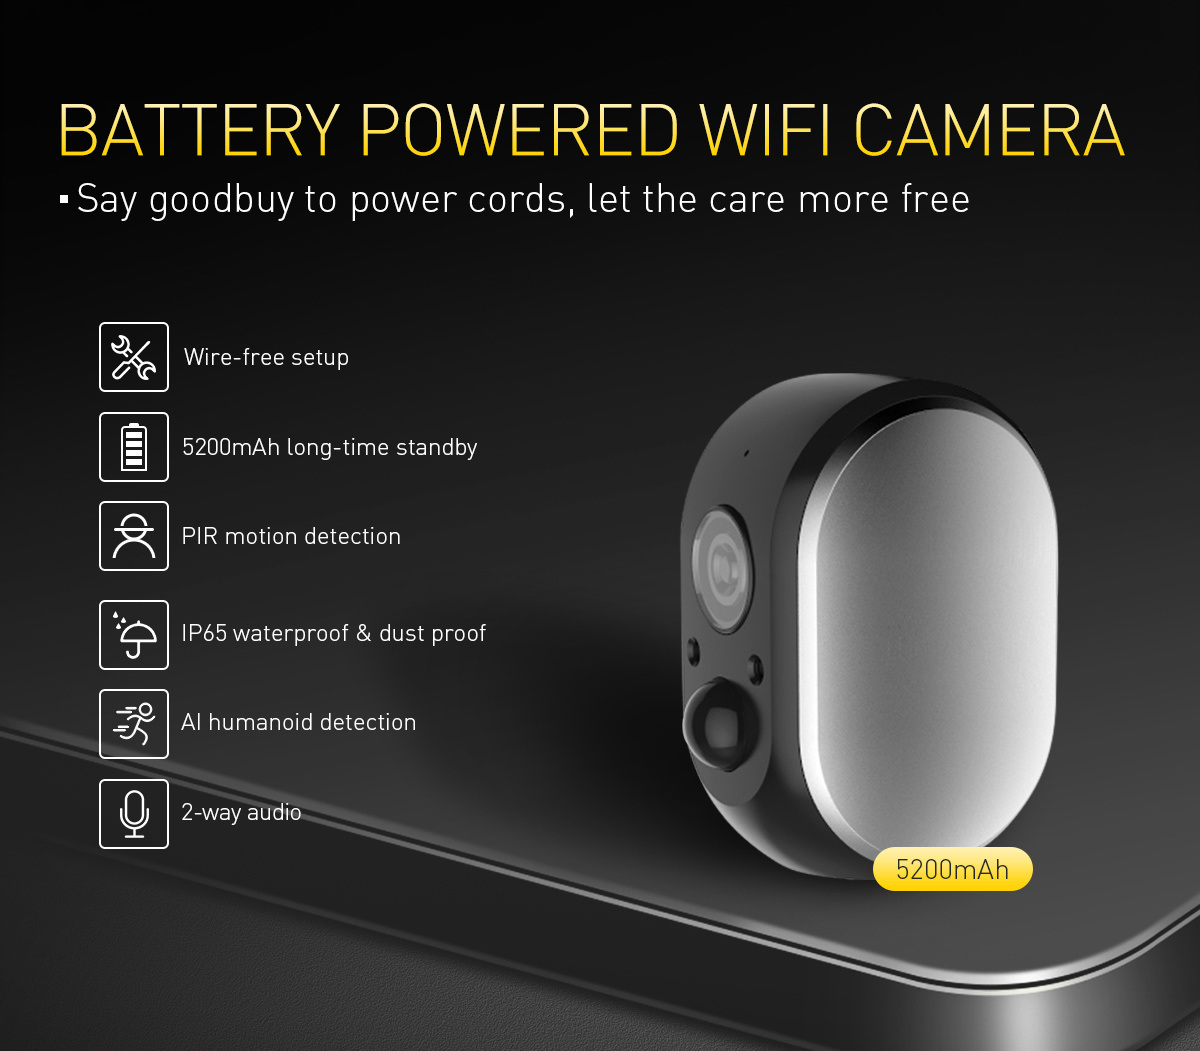 Tuya 4MP Battery Powered Camera Indoor WiFi Connection 2 Channel Kits